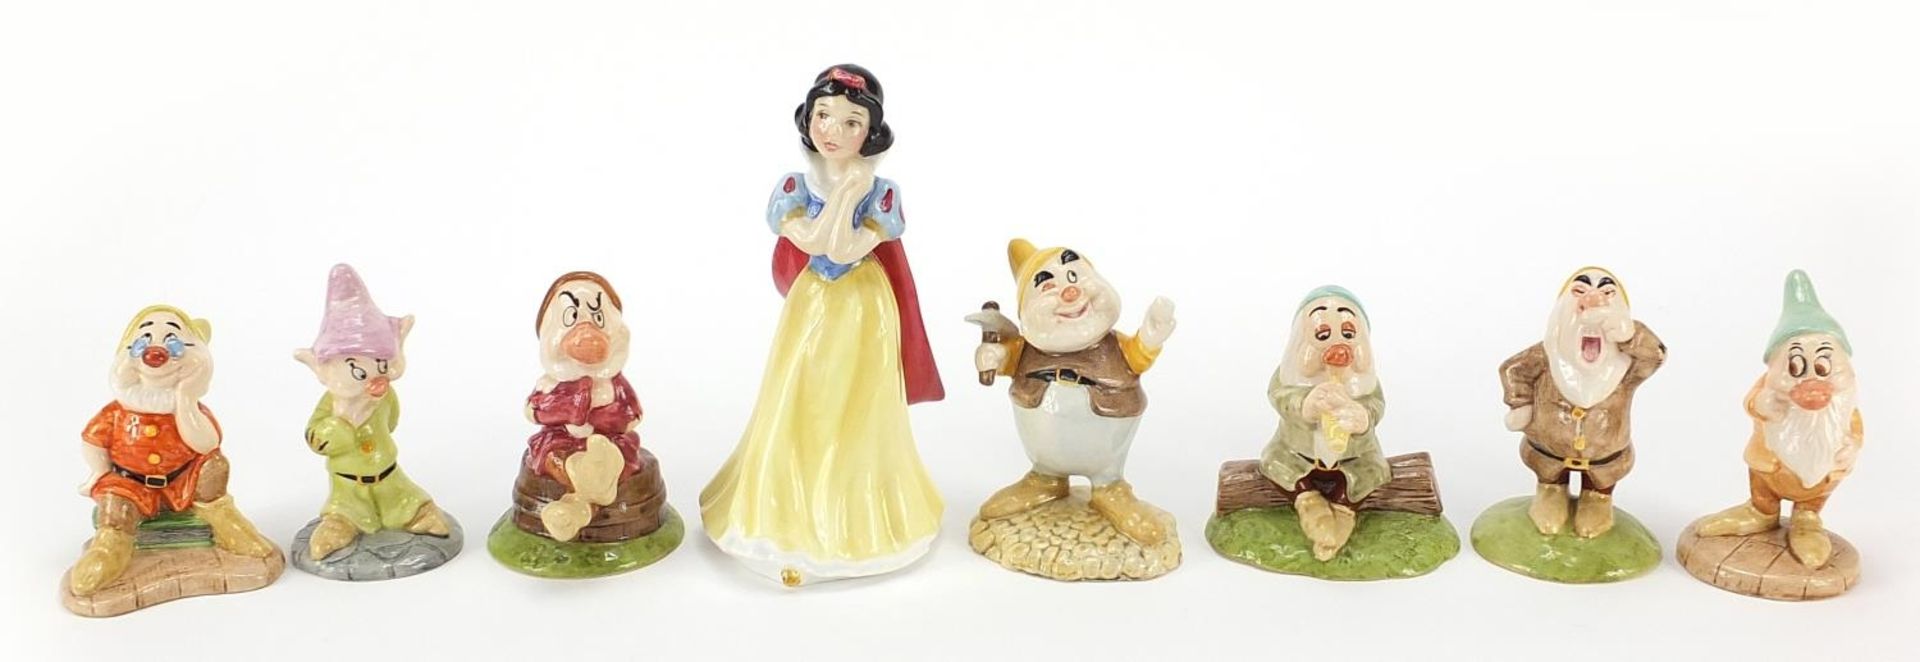 Royal Doulton Snow White & The Seven Dwarfs with boxes, the largest 15cm high - Image 2 of 7